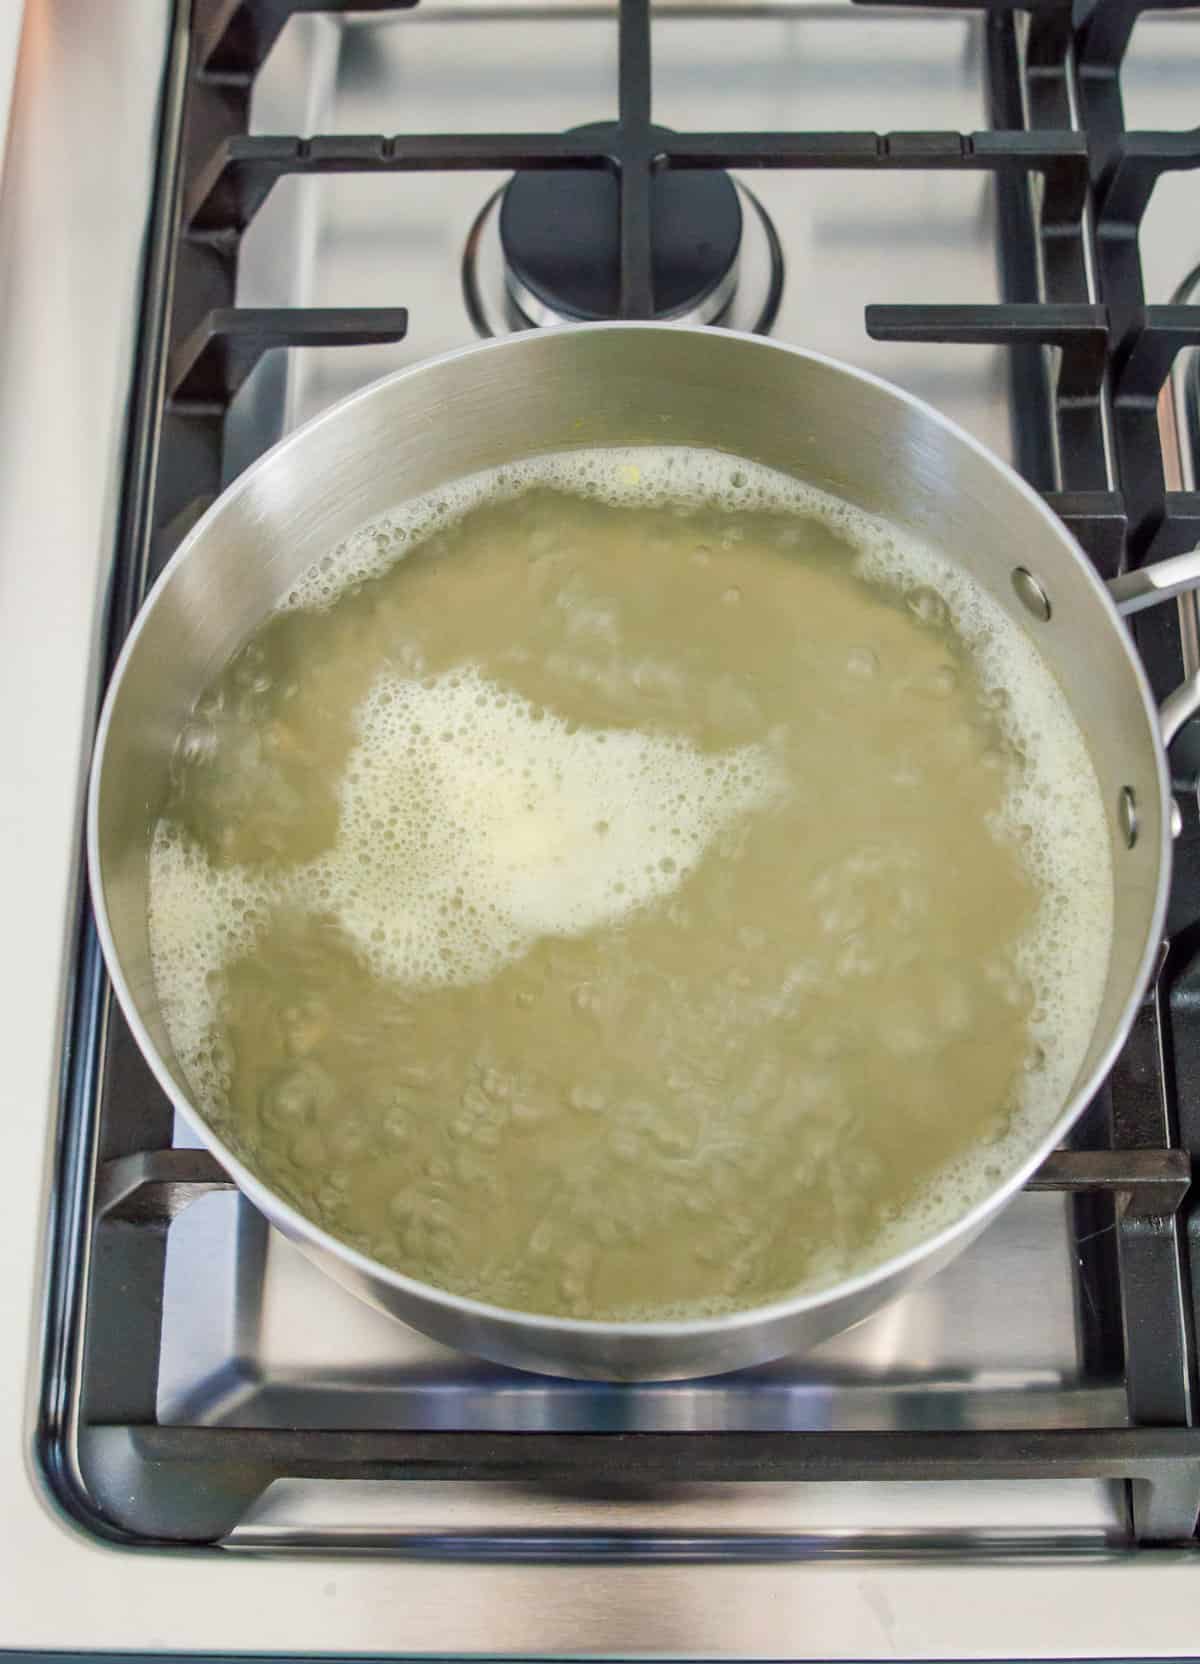 A pot of boiling water on the stovetop.